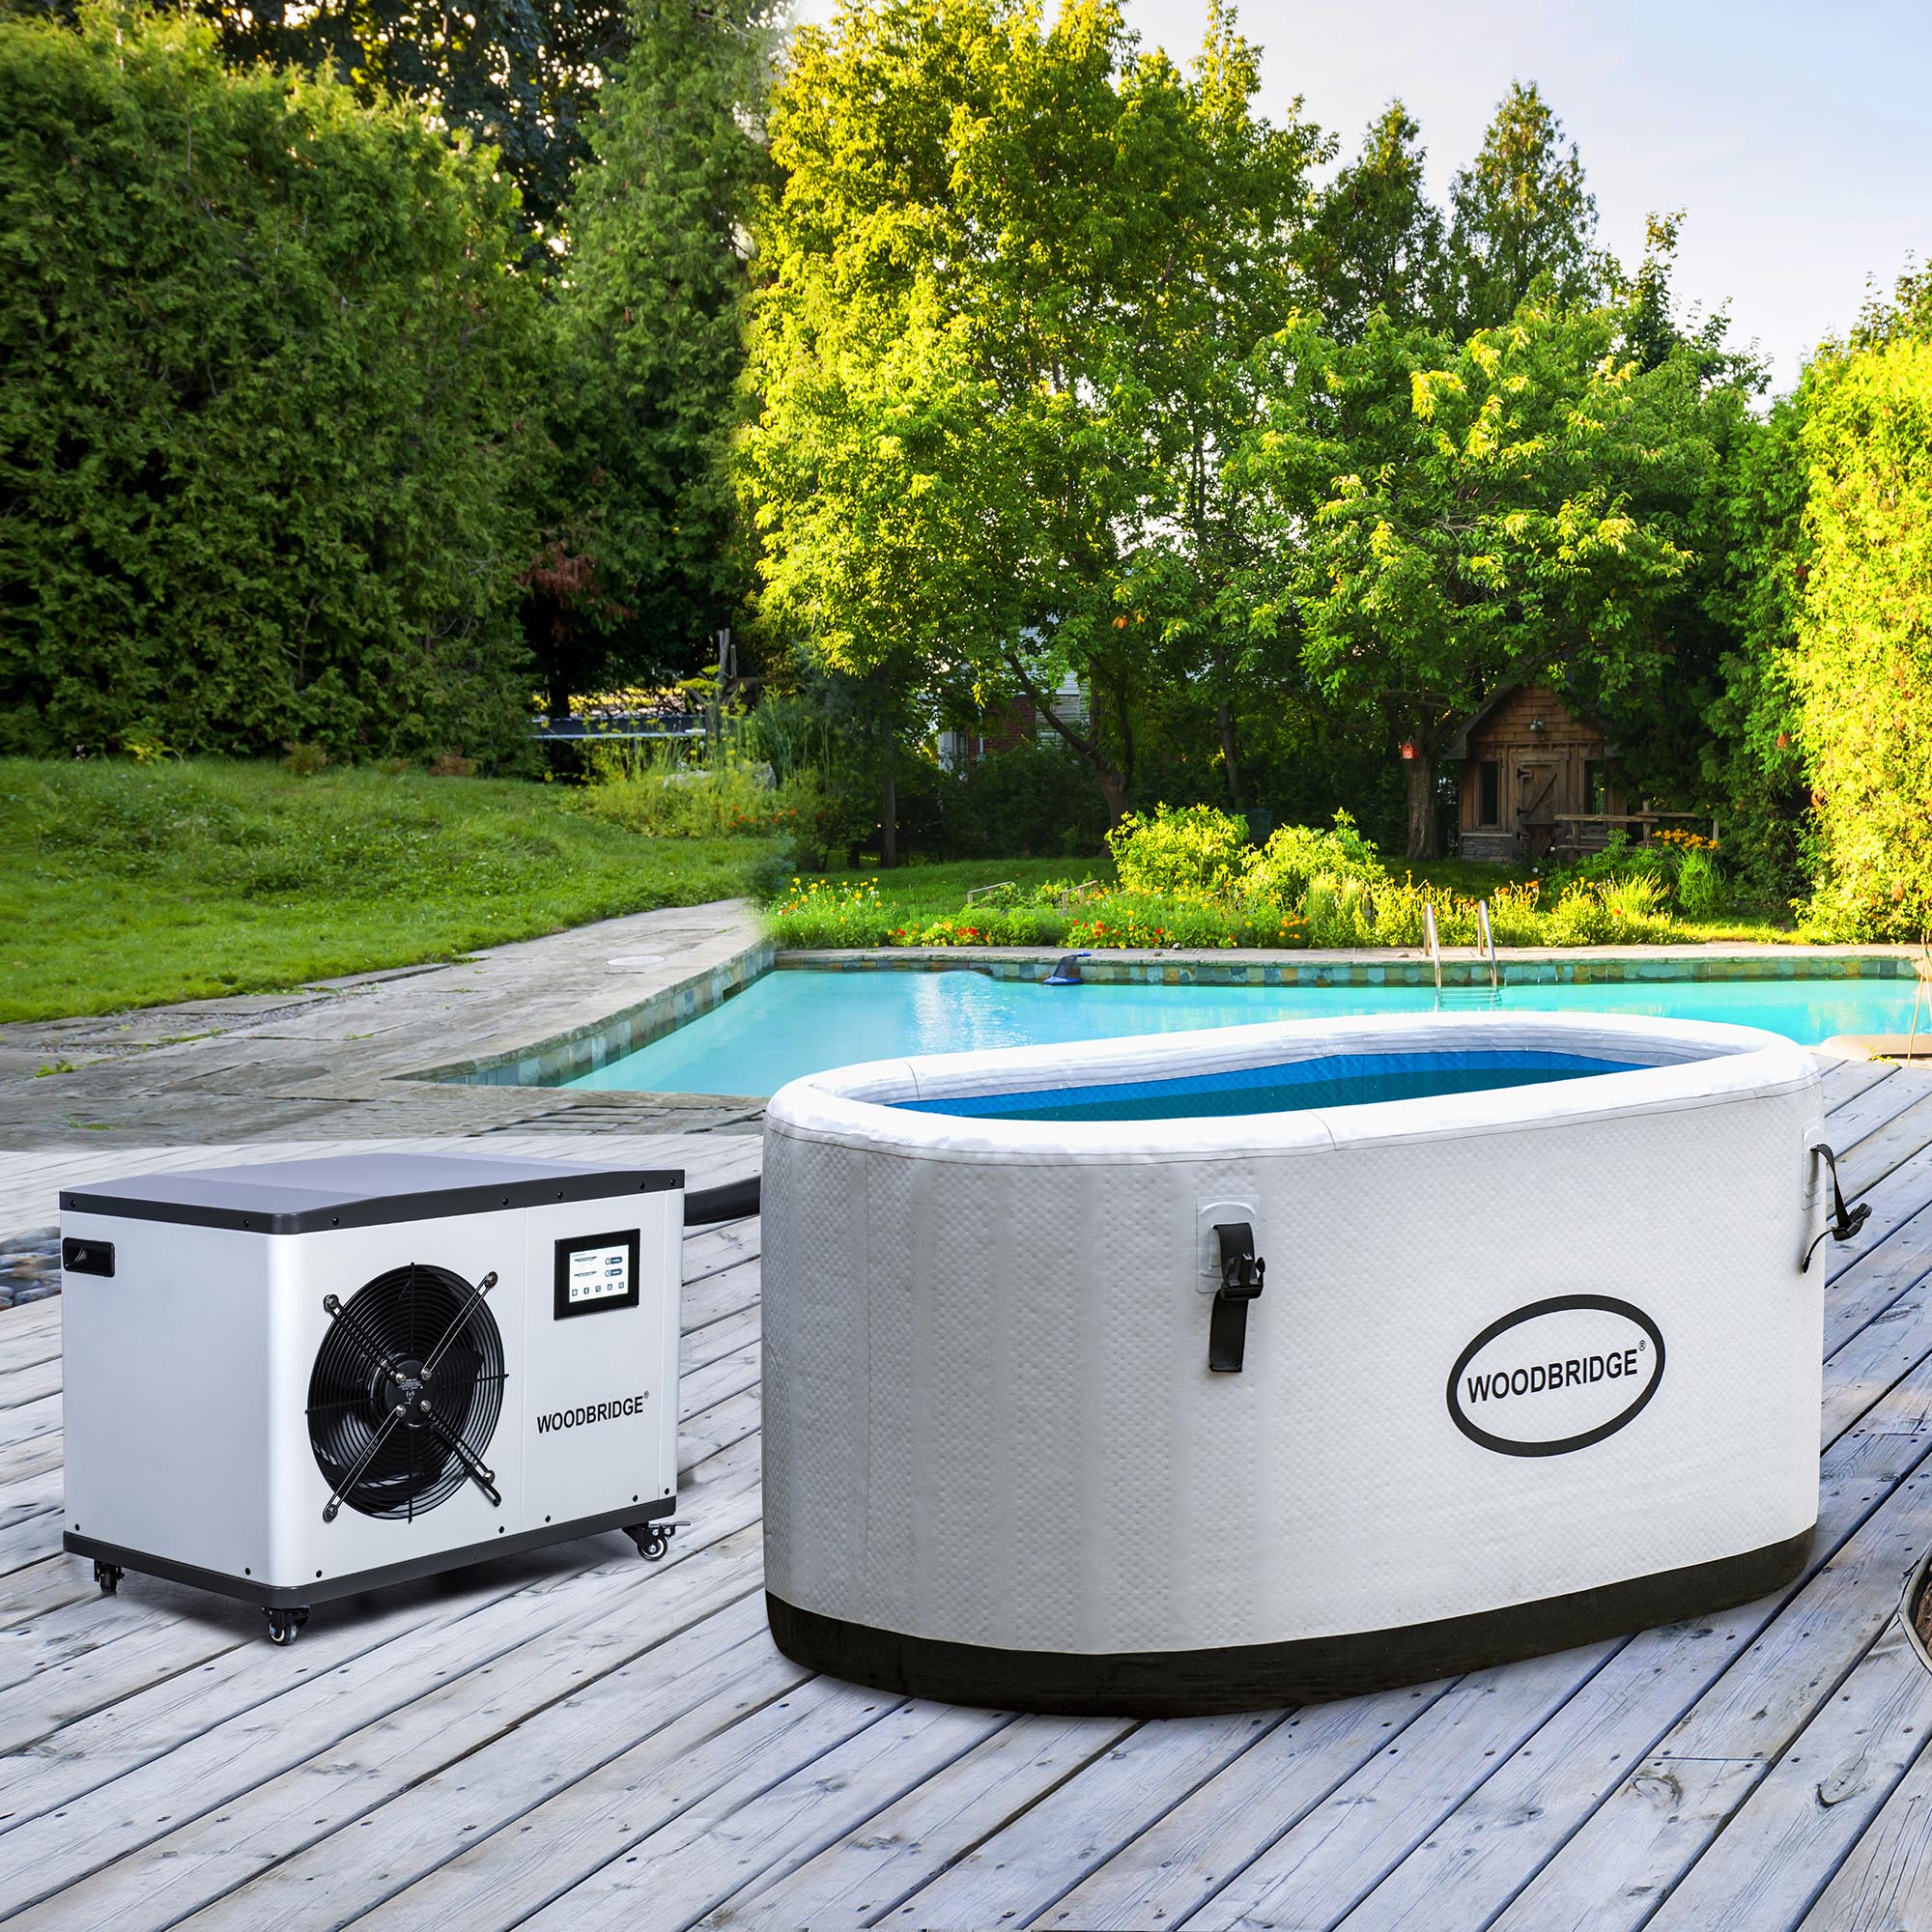 WOODBRIDGE Inflatable Cold Plunge Tub with 1.3 HP High-Performance Cooling and Heating Chiller in White,Filter circulation system,PVC Insulated Lid, Hand Pump and Repair Kit Included, Anti-Slid Bottom